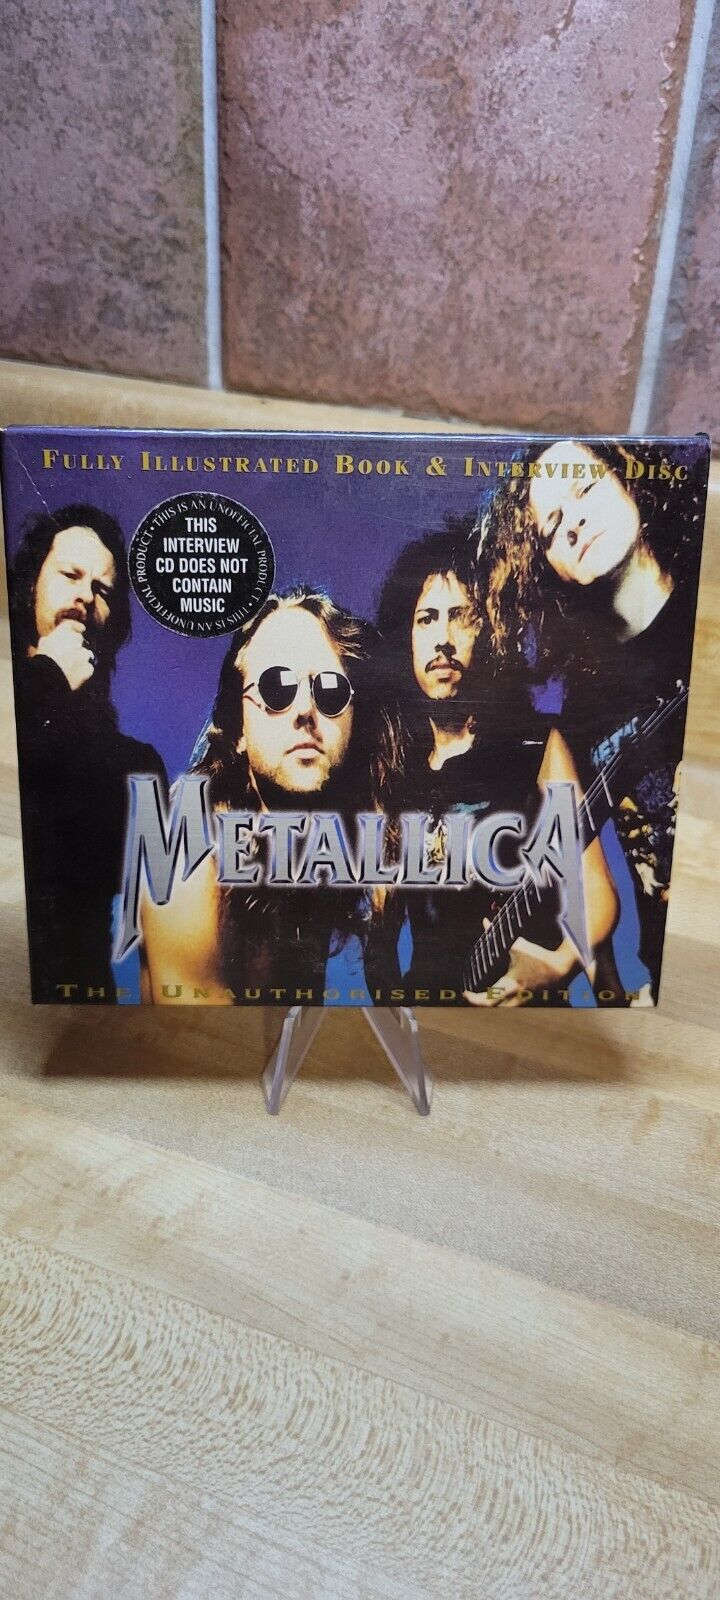 Metallica ‎limited Edition Illustrated Book and Interview Disc 1 Pcs - 1996 VG+